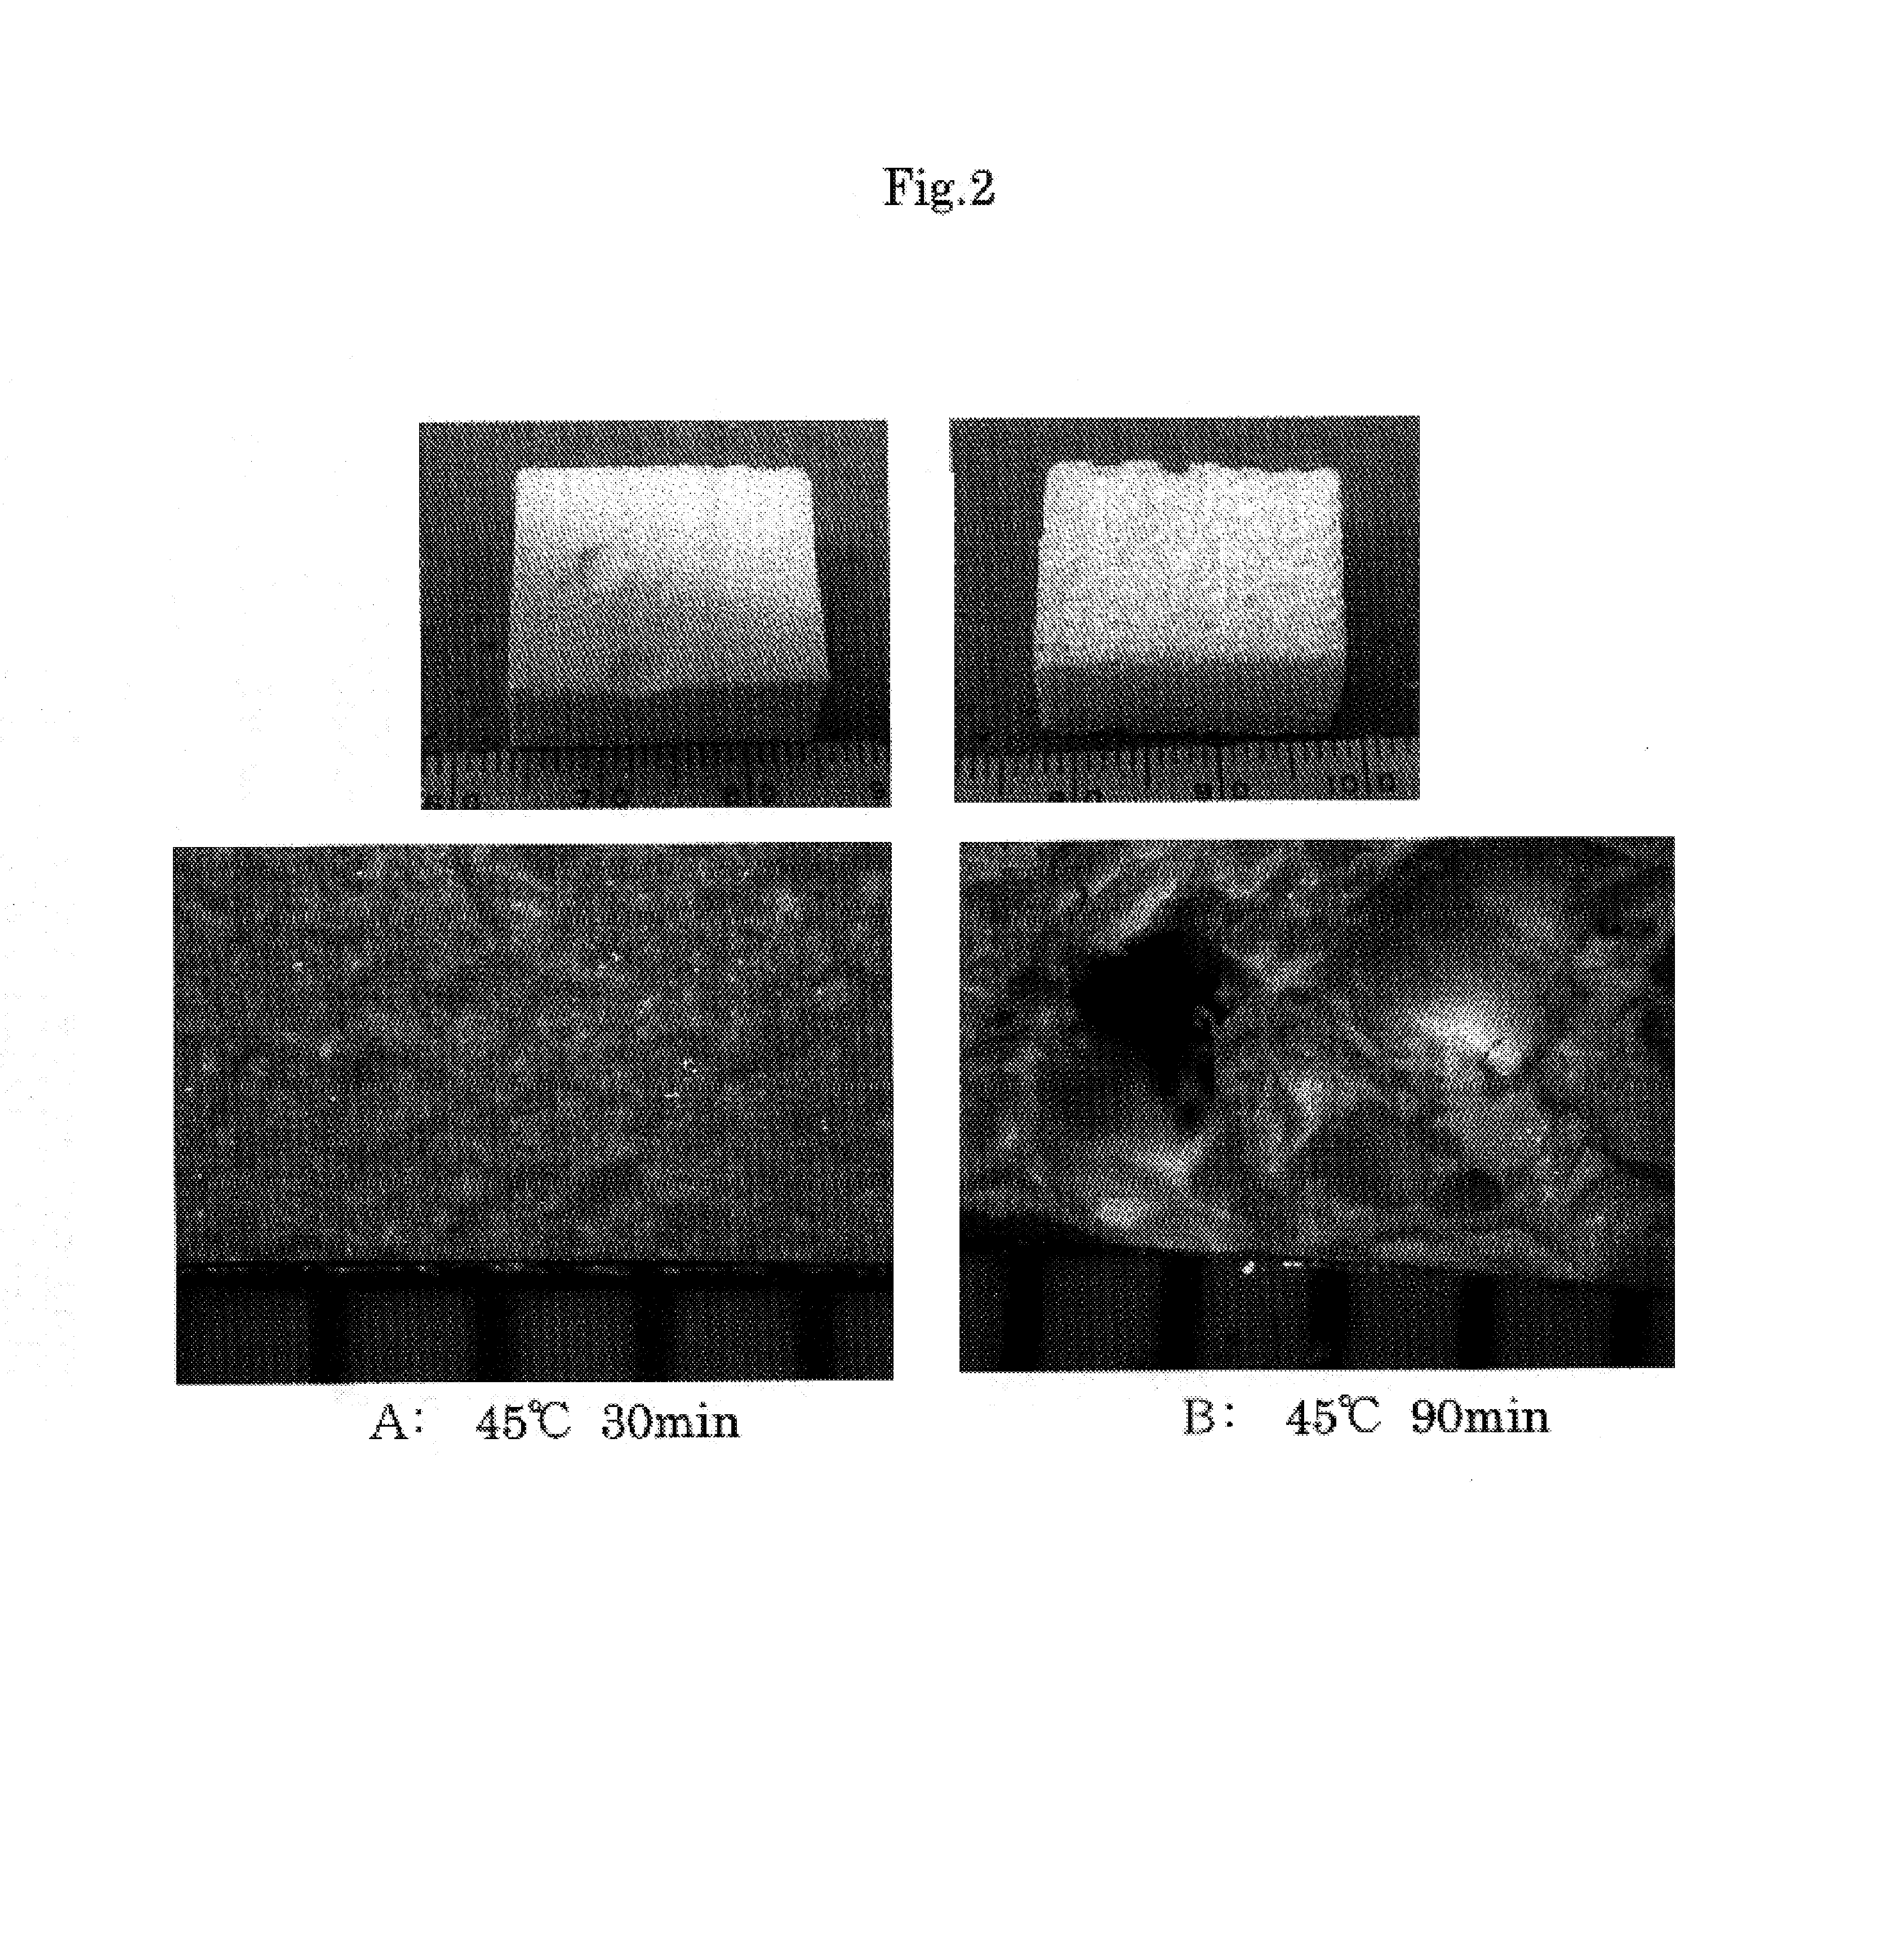 Process for producing porous composite materials